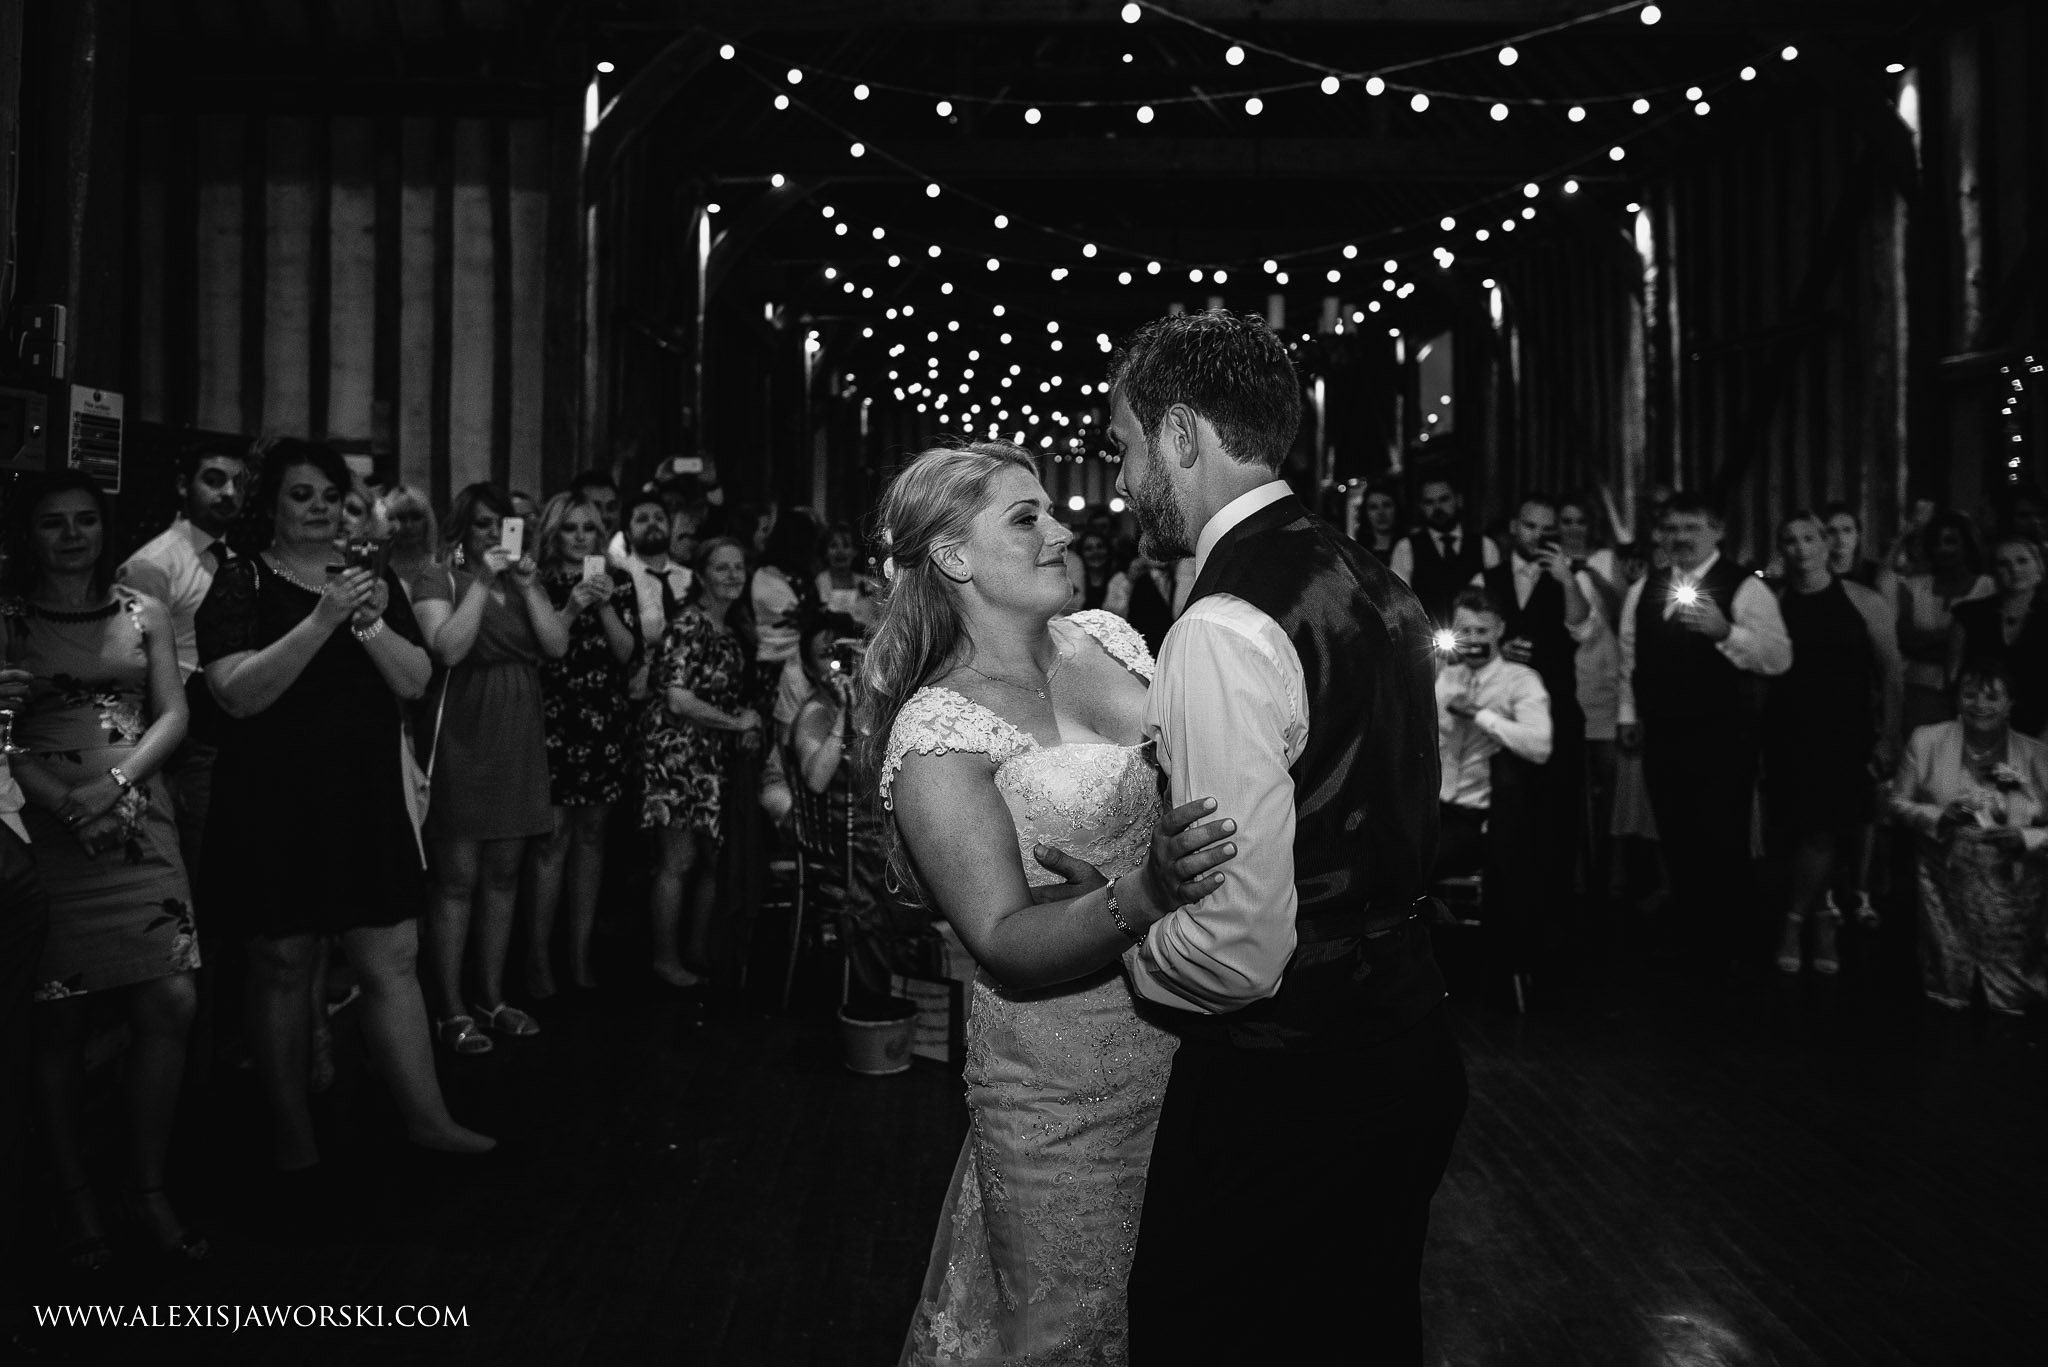 first dance by the bride and groom